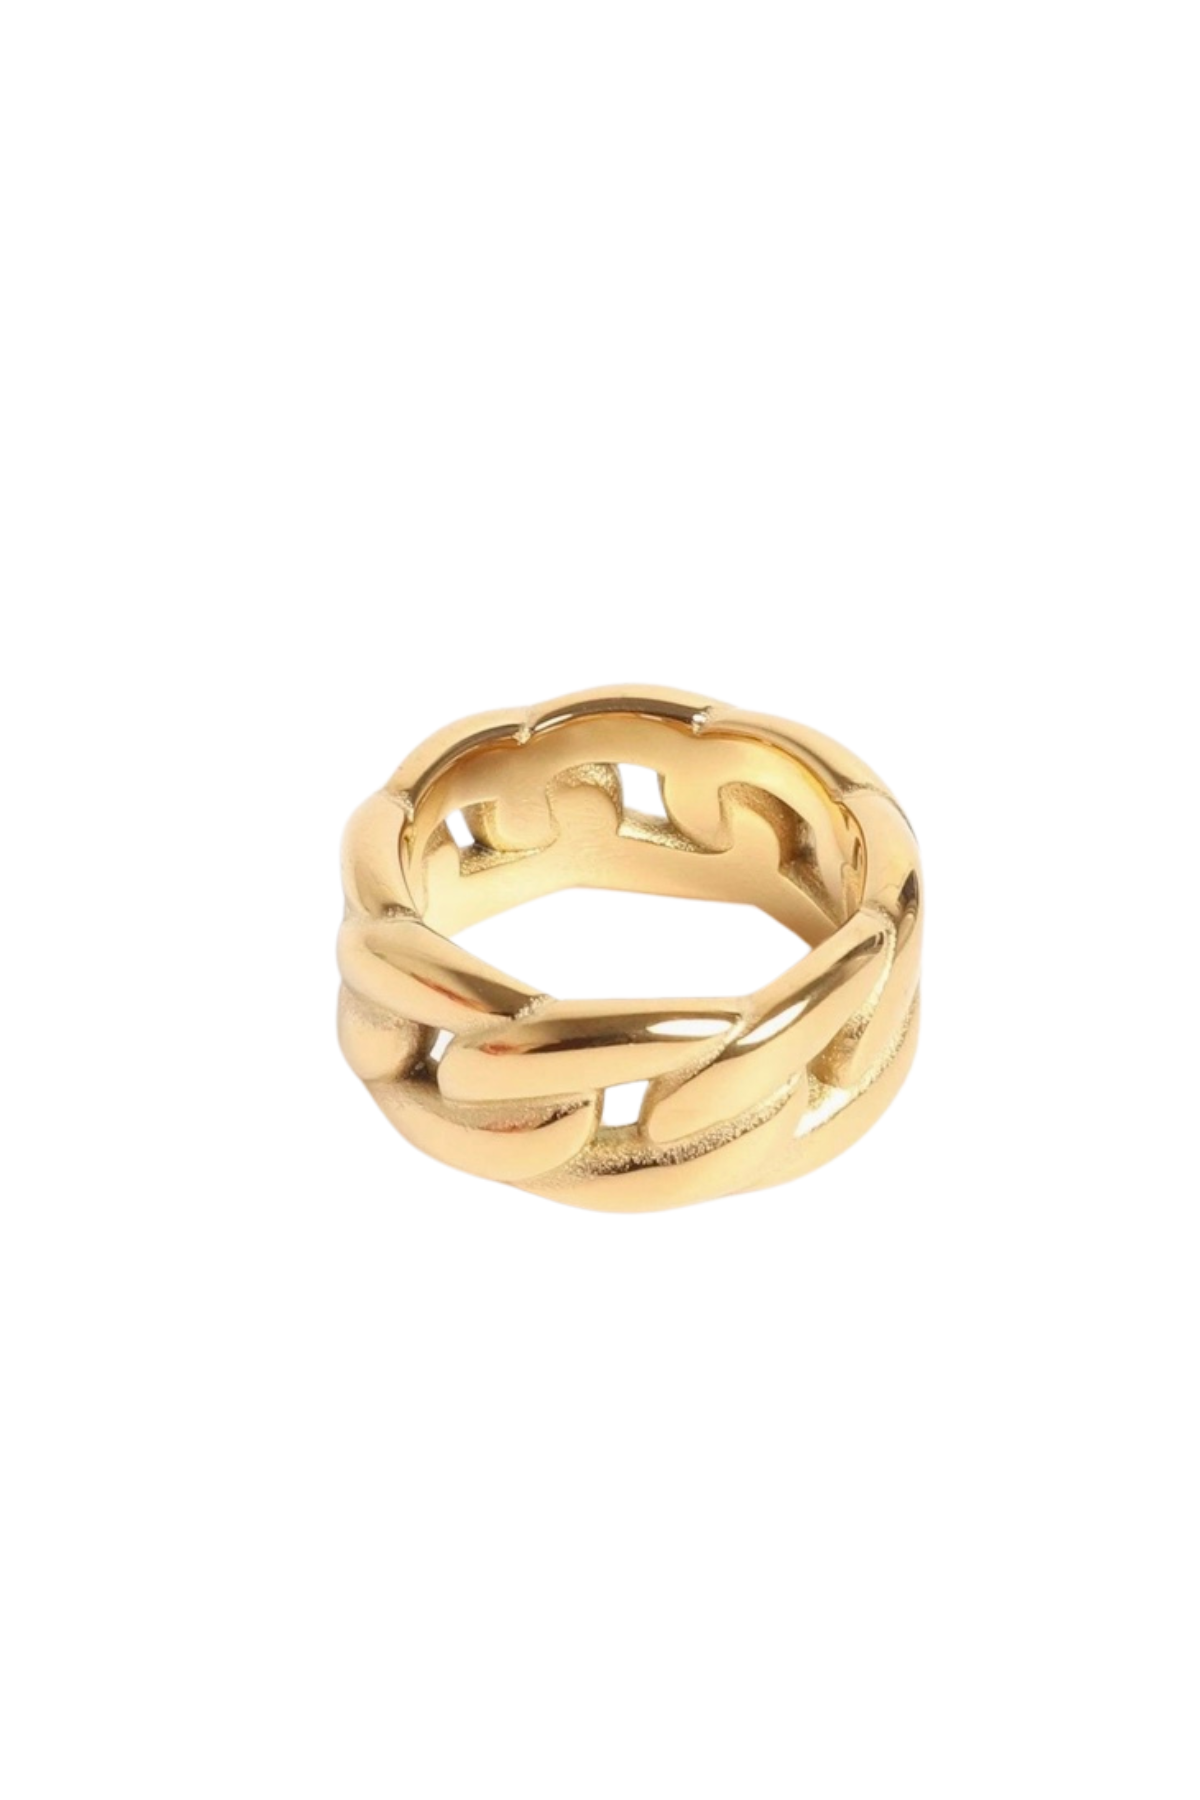 Gold Queens Band Ring by Marrin Costello